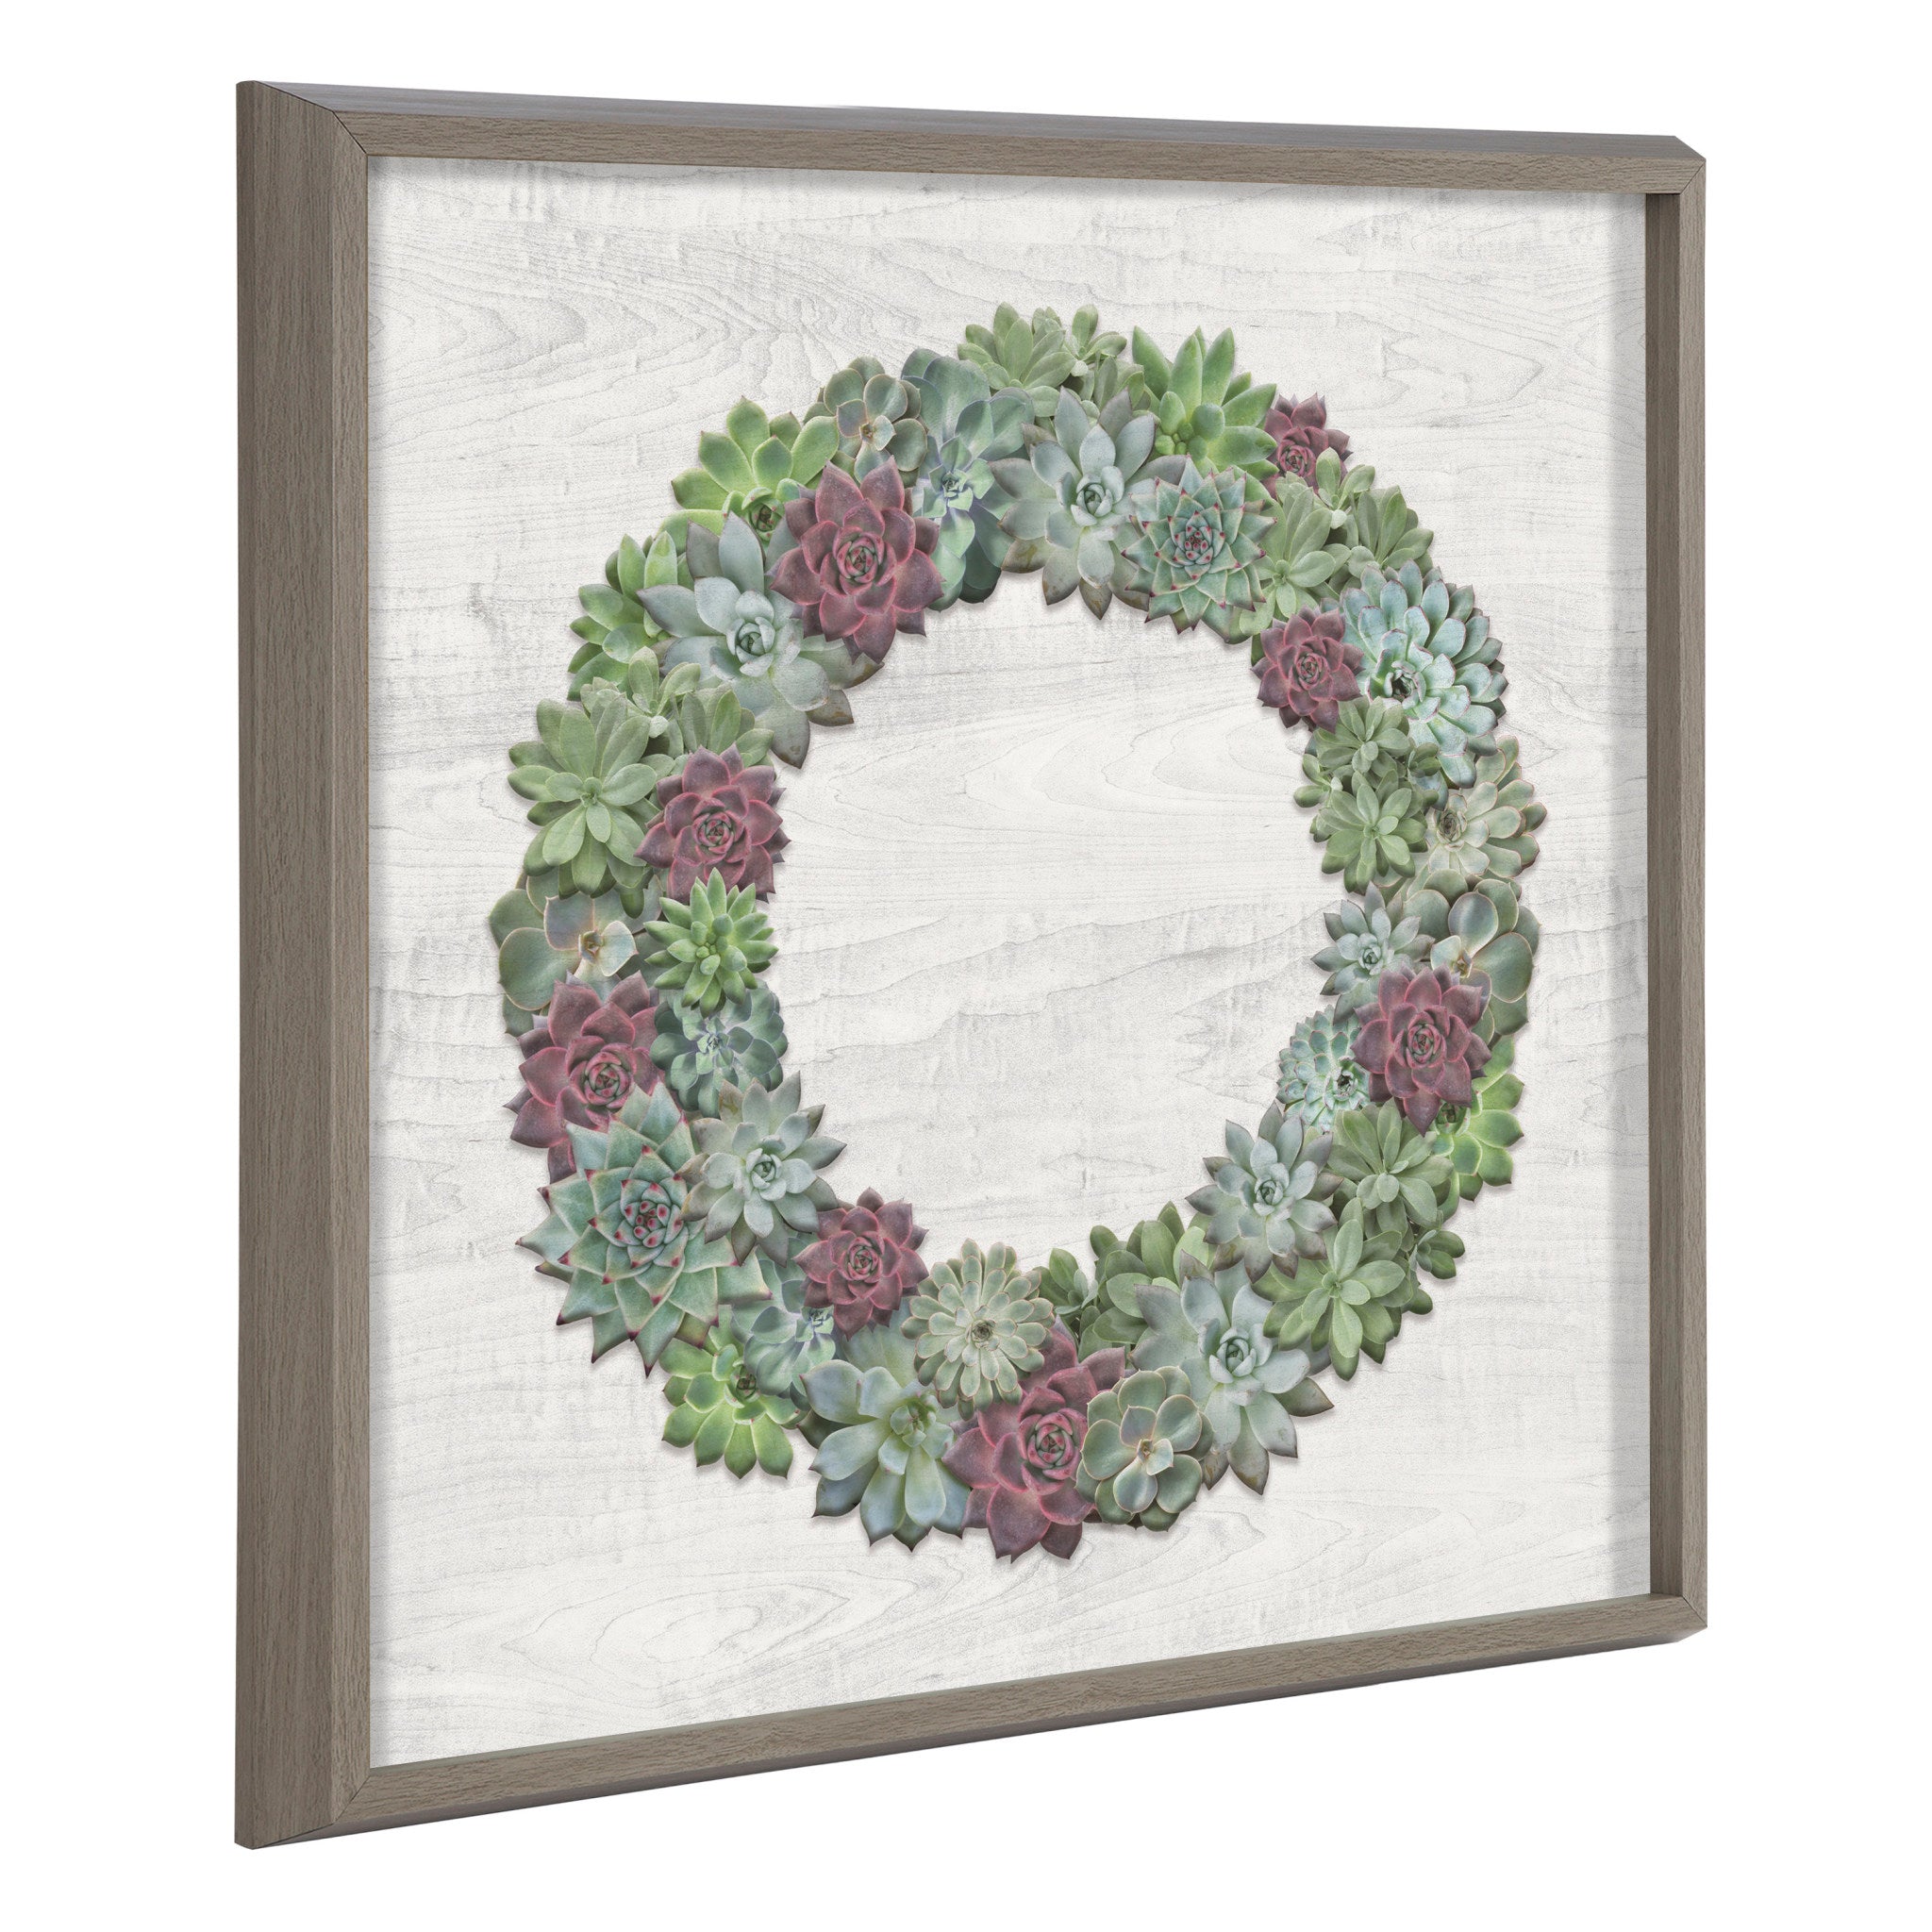 Blake Holiday Succulent Wreath Framed Printed Wood by The Creative Bunch Studio